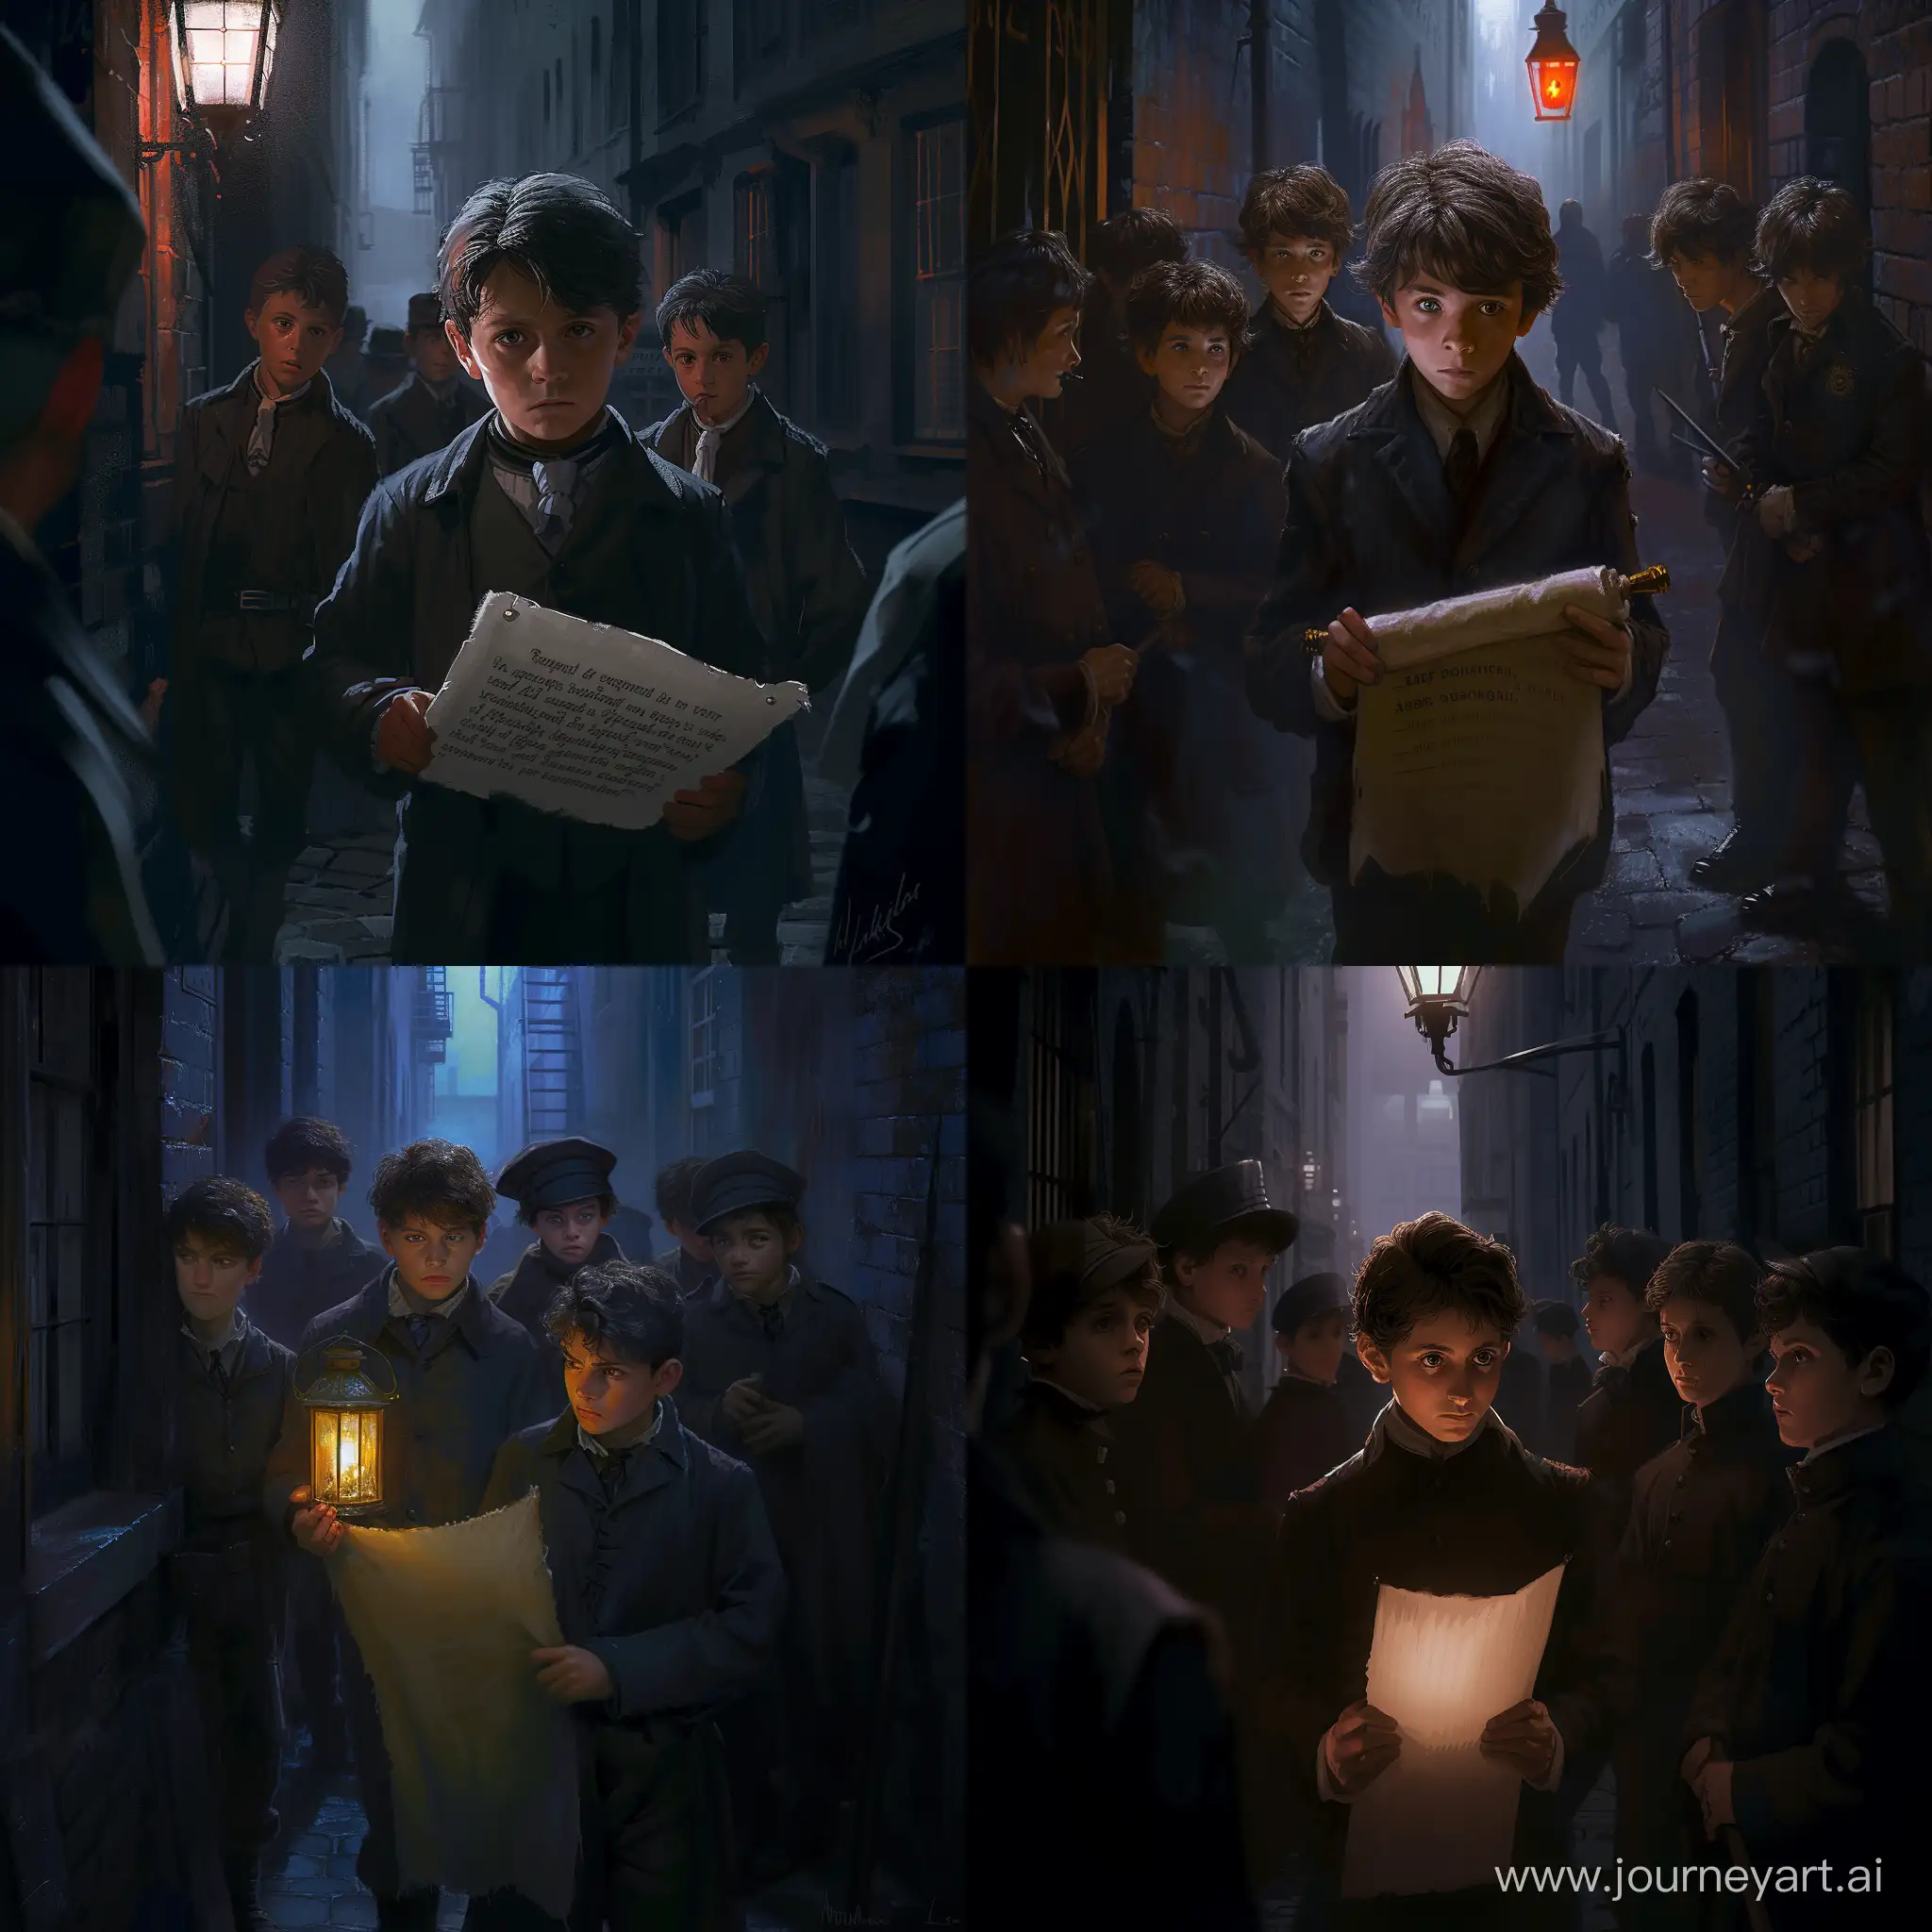 A 14-year-old boy is arrested by police consisting of boys of the same age, 19th century. The scene takes place in a dark alley, lit only by the dim light of a lantern. The police boy reads the sentence from the scroll, his face expressing sternness and determination. The image should be rendered in a 19th century style, using dark, rich colors and soft lighting to create an atmosphere of mystery and tension. The mood of the scene is filled with drama and internal conflict